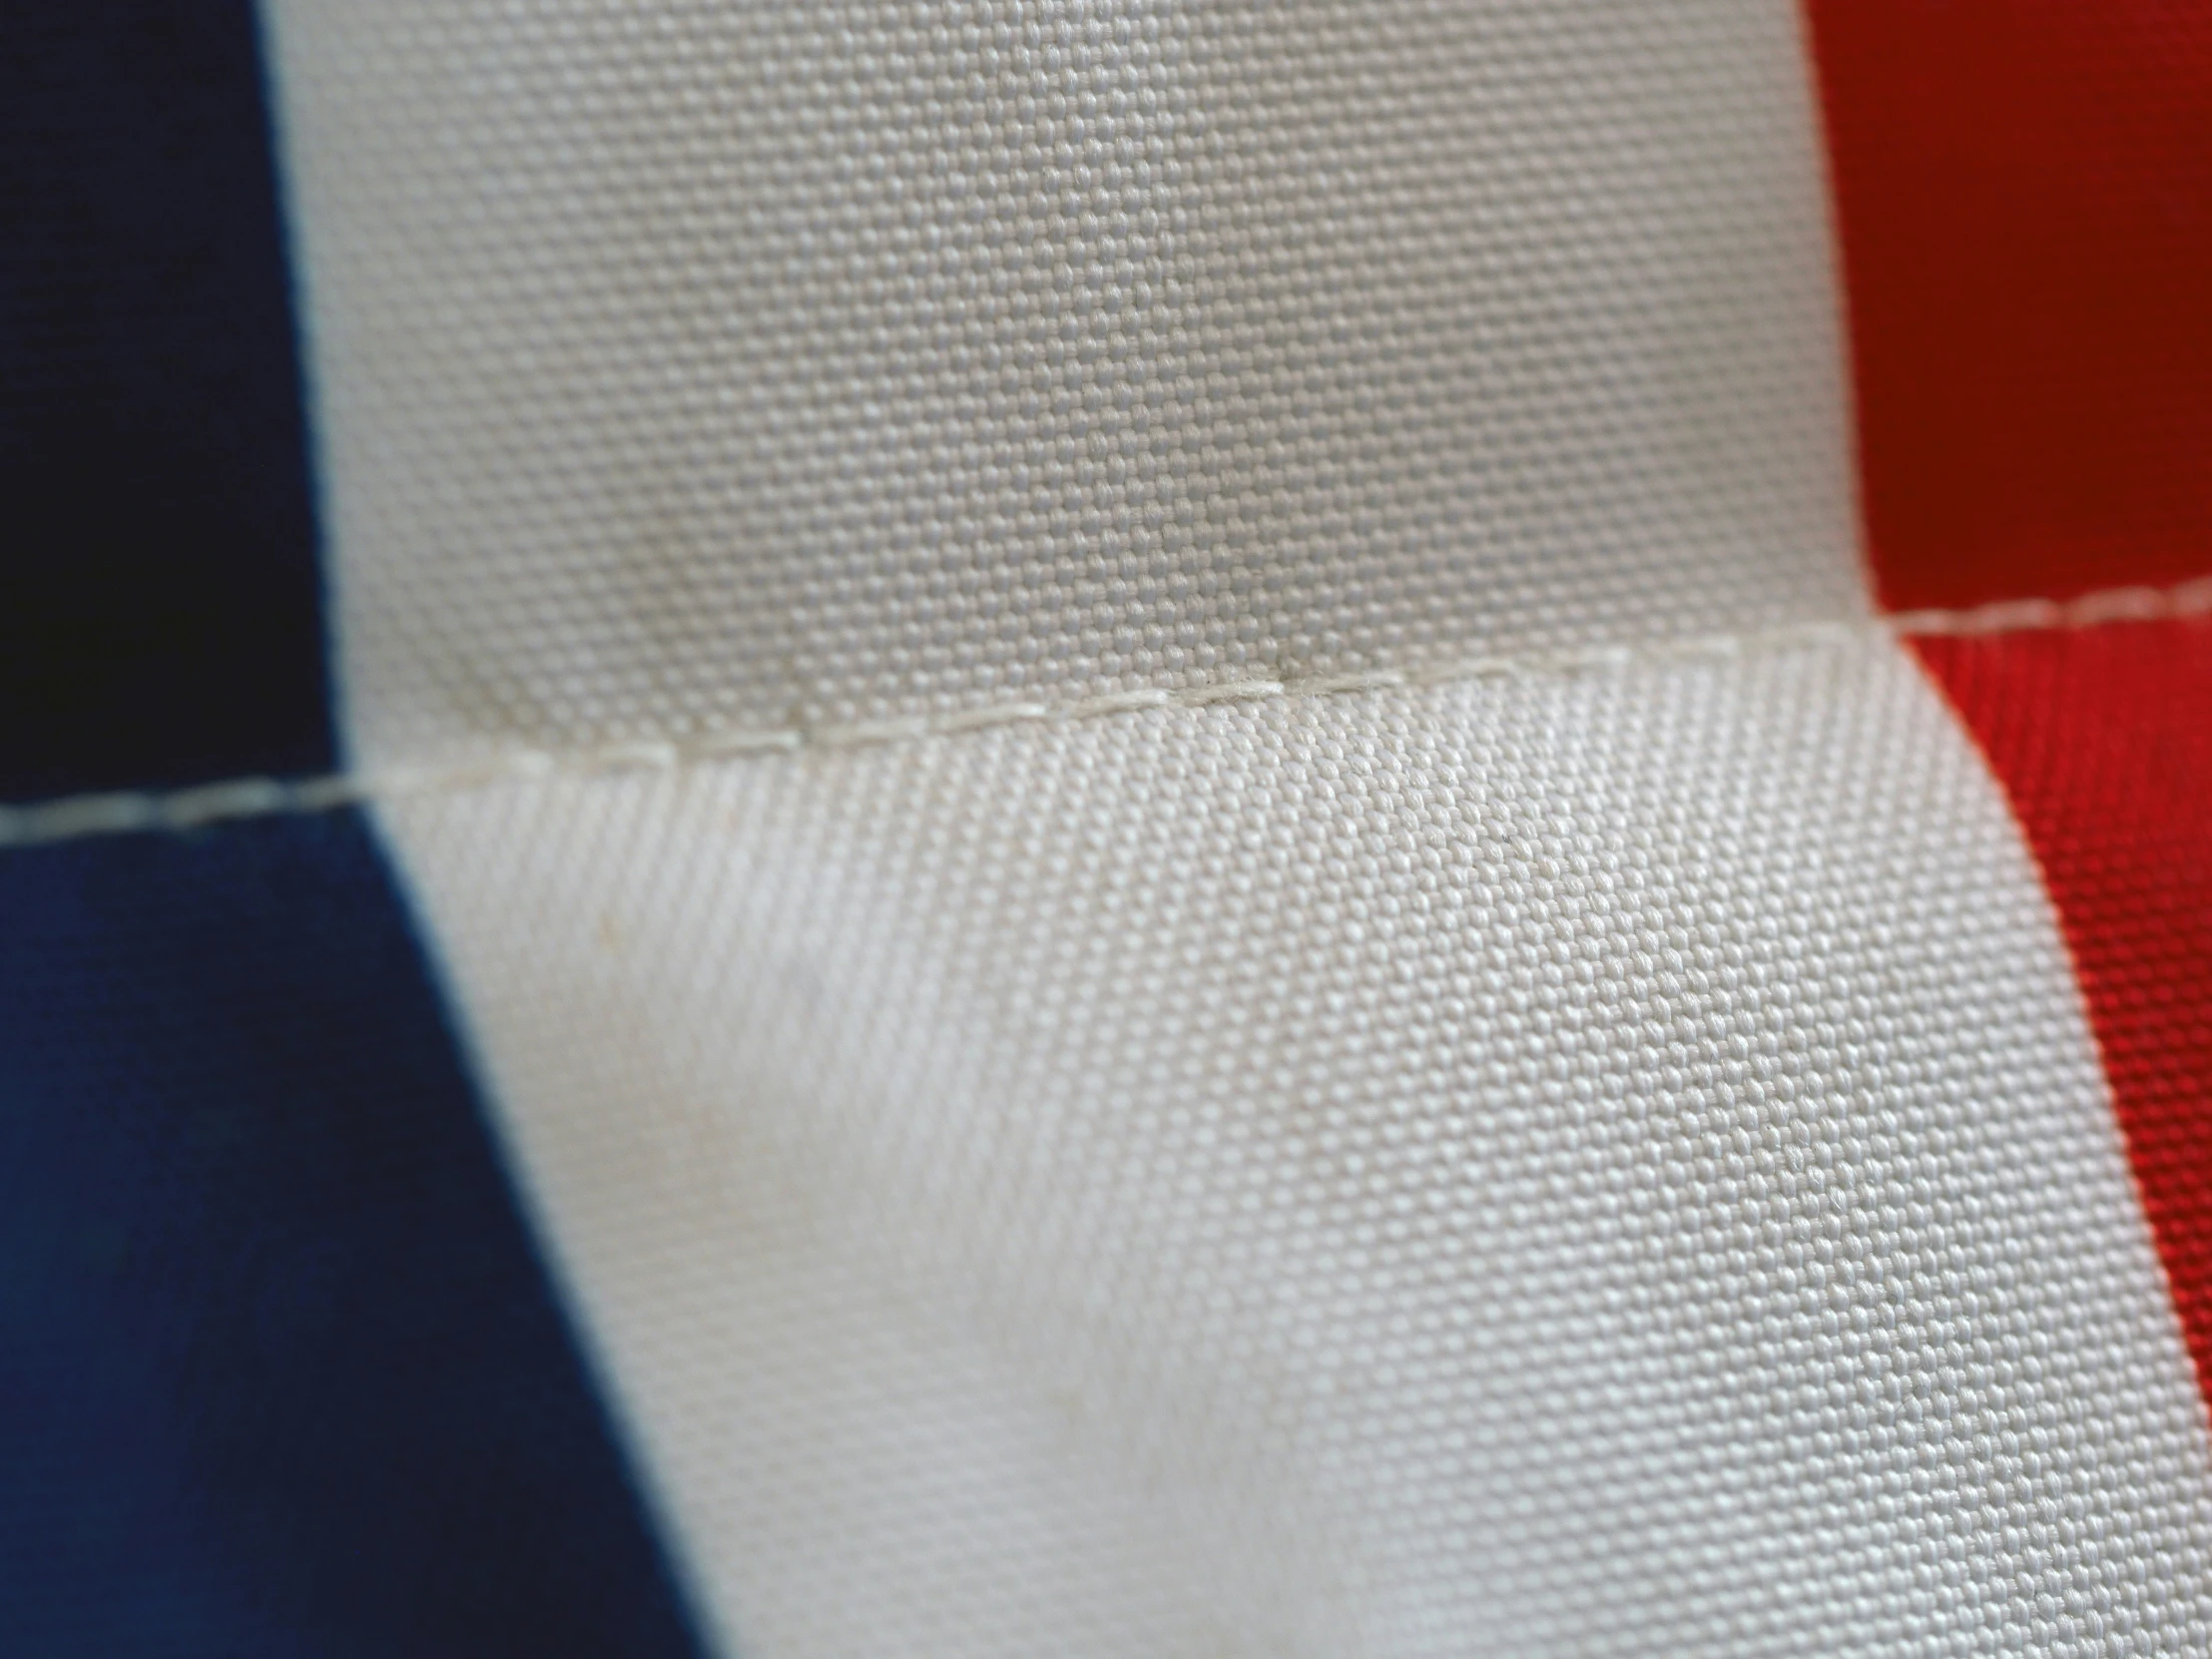 the flag of france on the fabric